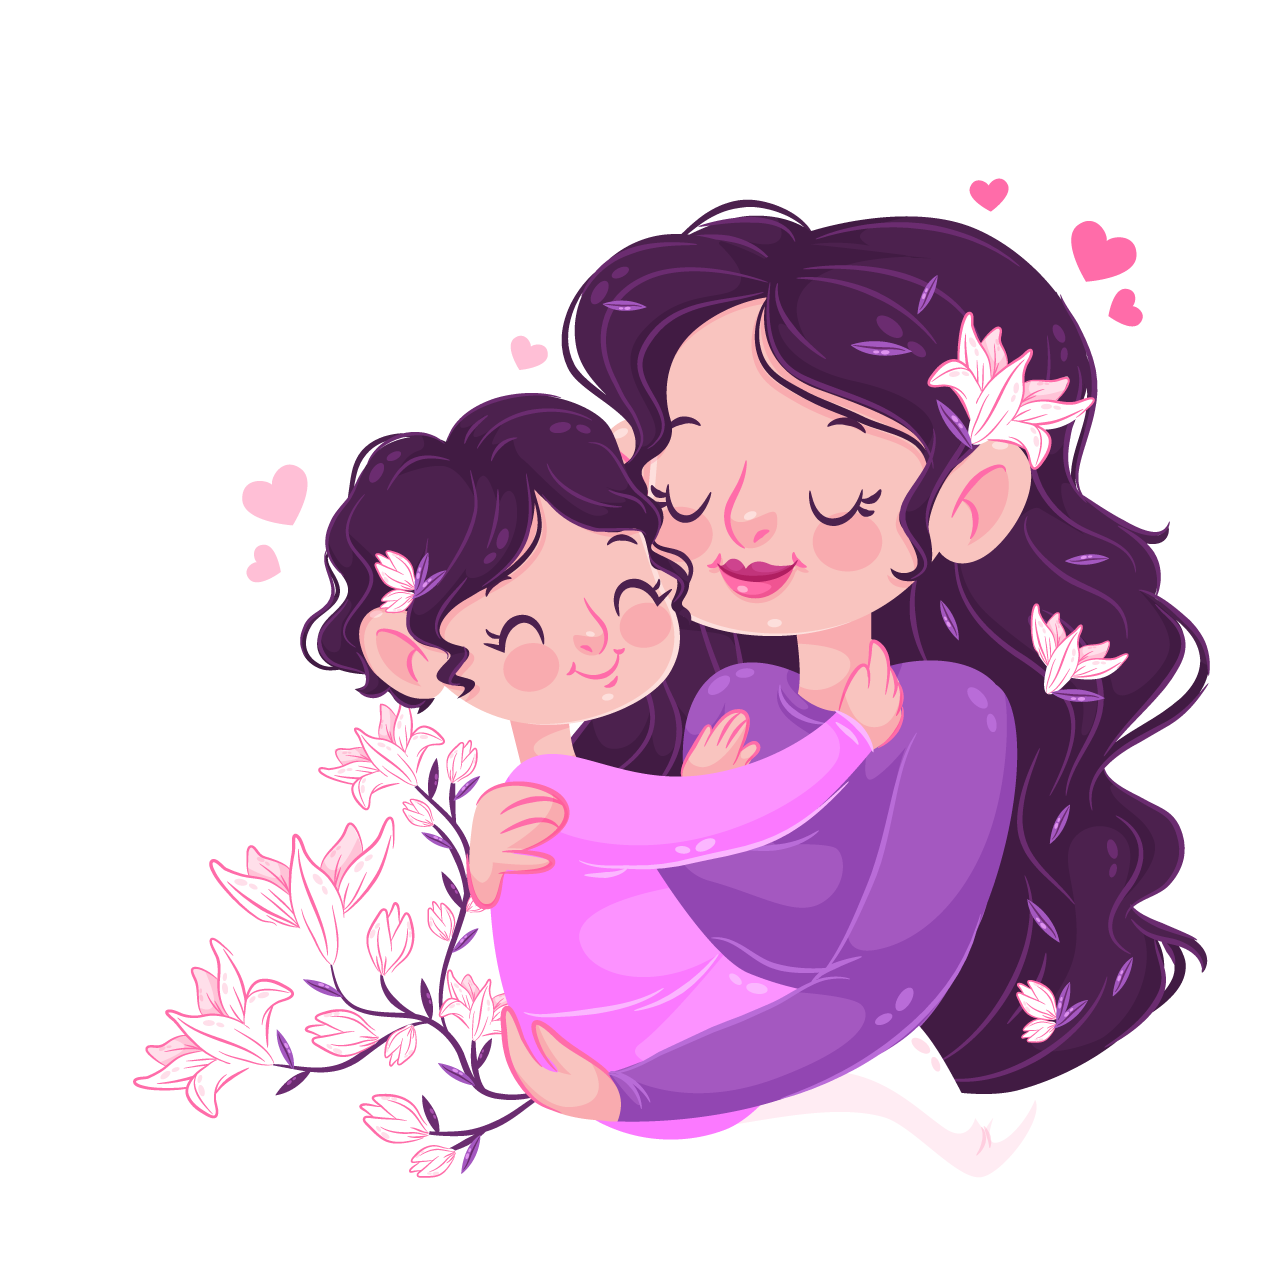 Mother child hugging holding branch flowers cartoon